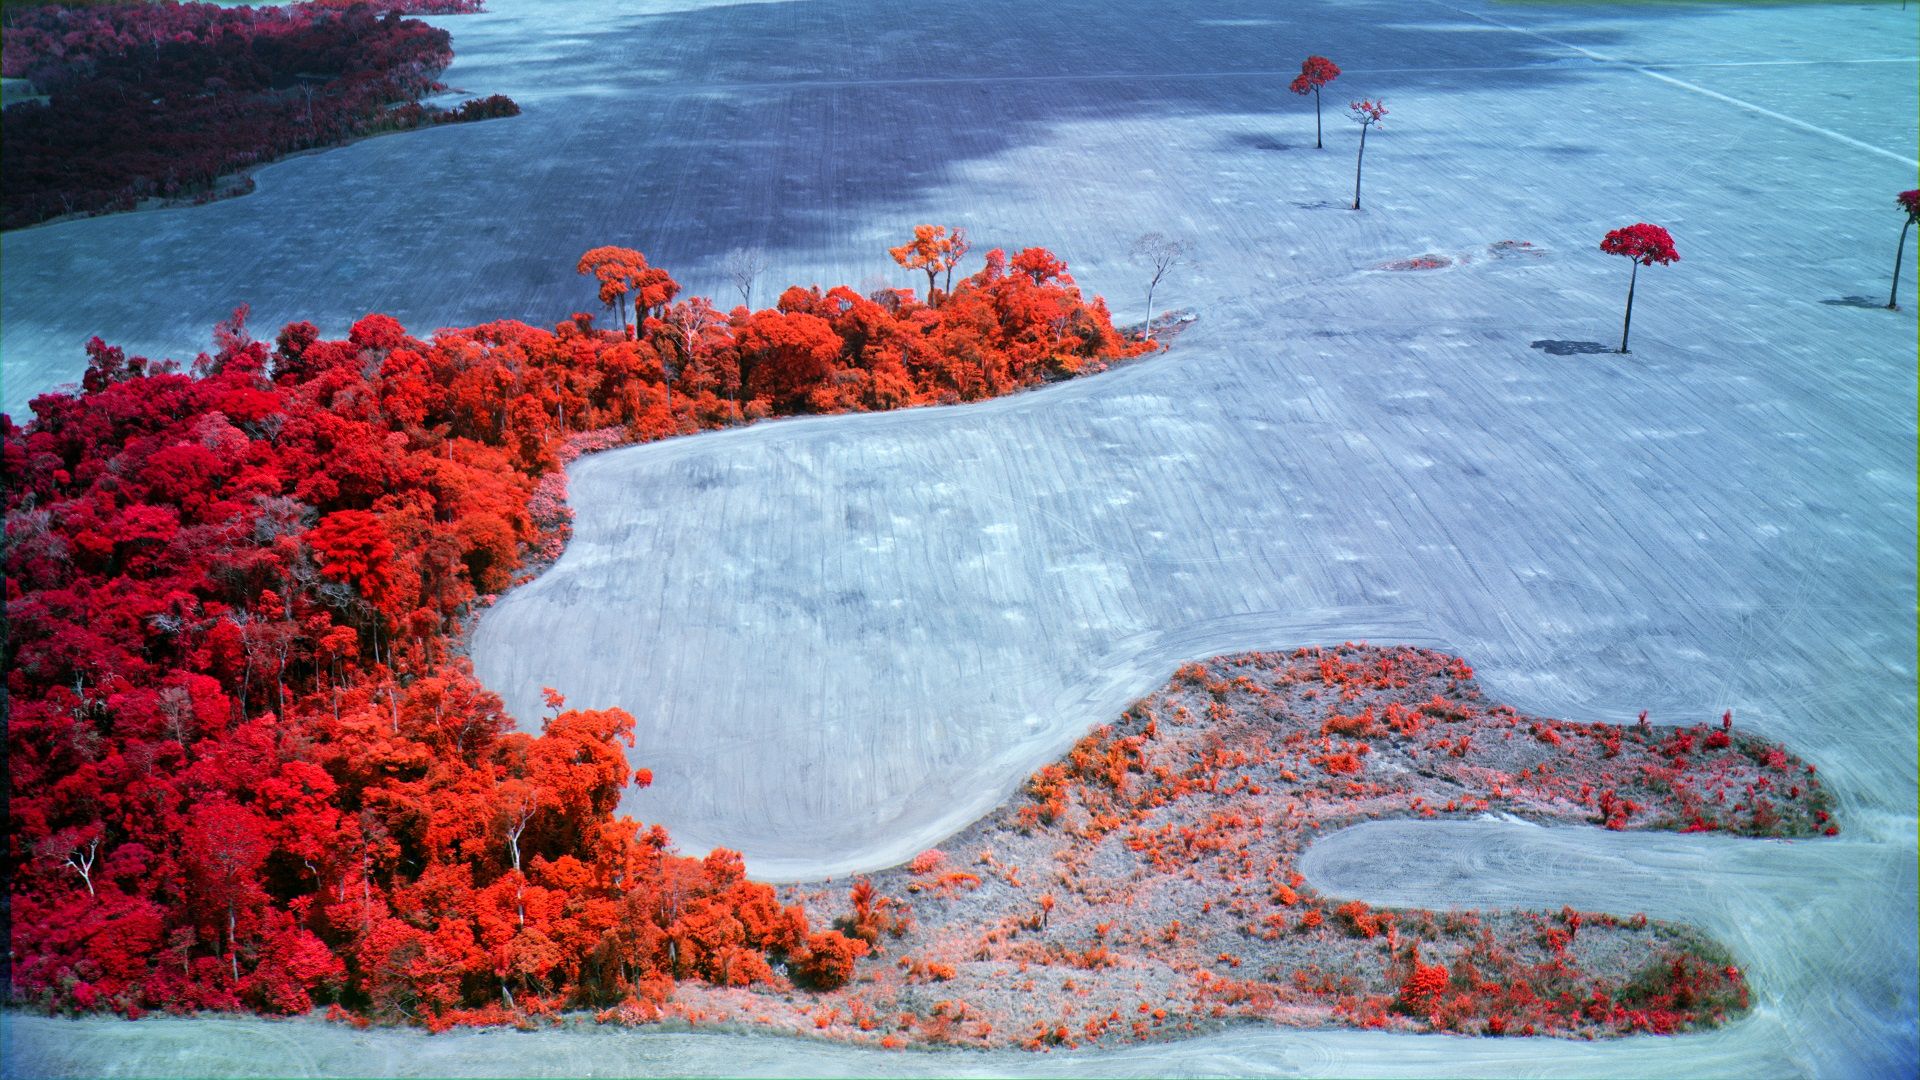 COLOURFUL: A work from \'Broken Spectre\', Richard Mosse\'s study of the impact of climate change